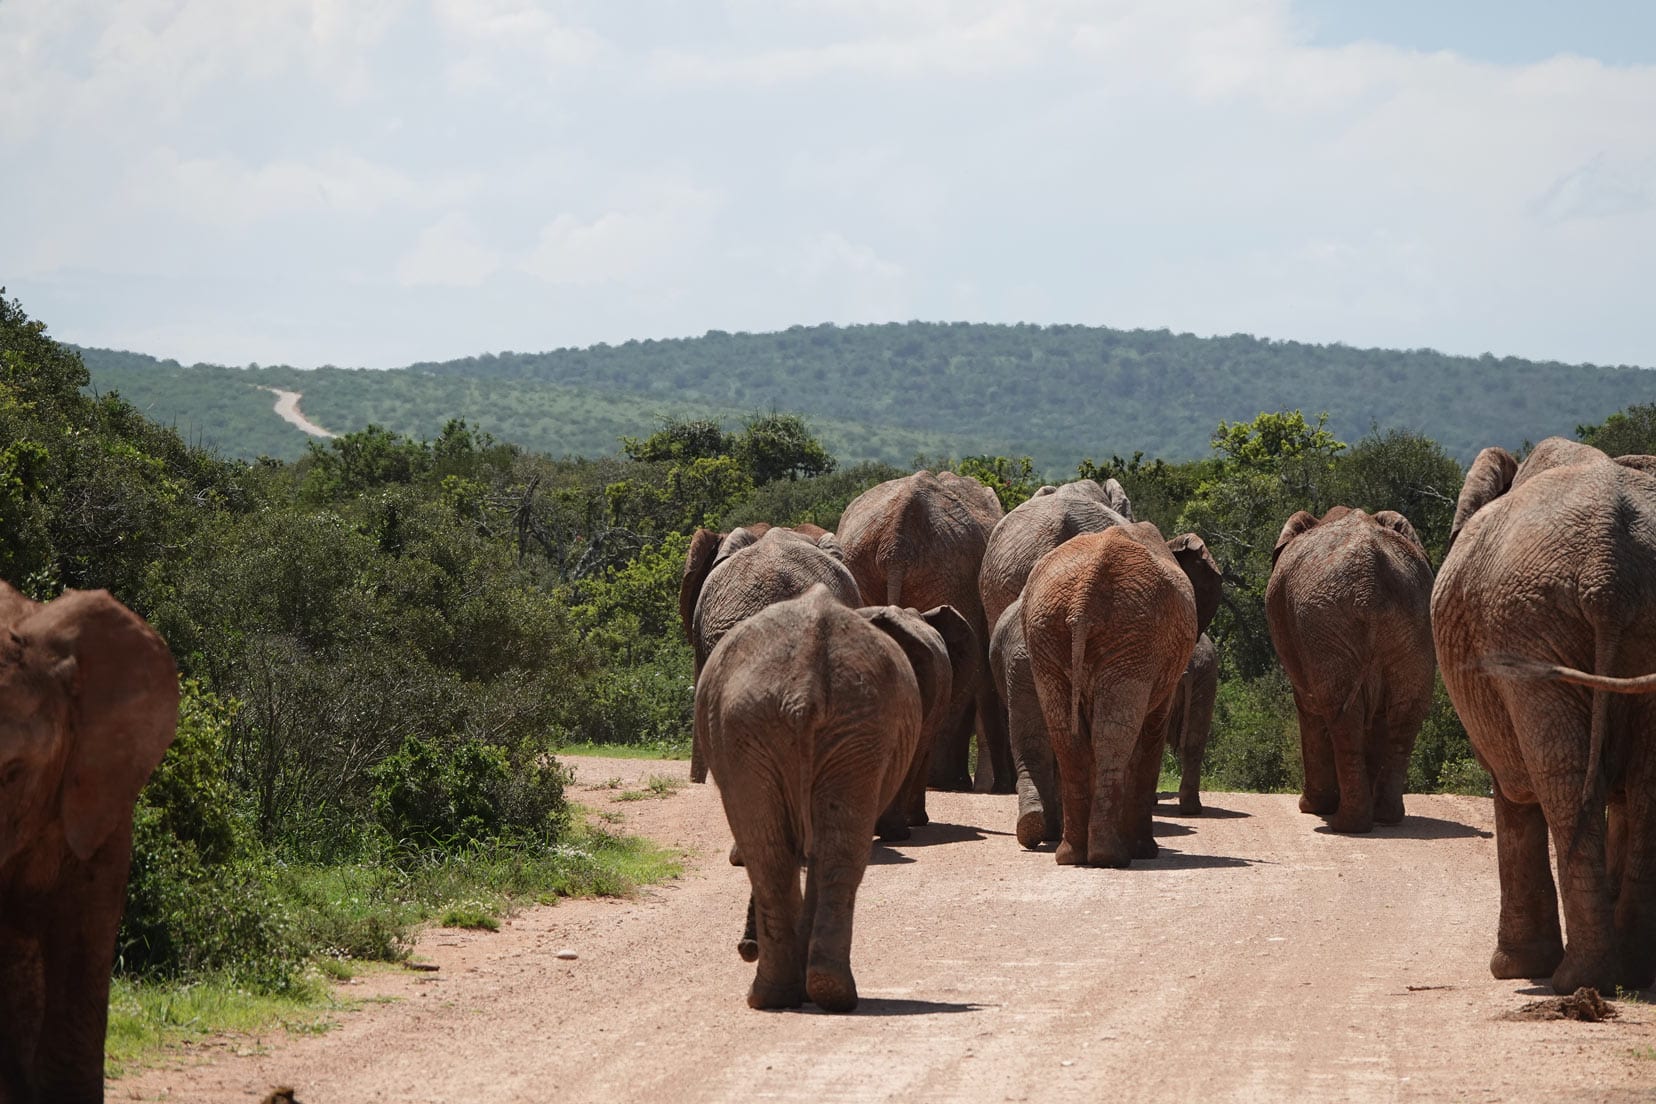 driving-in-south-africa_road-traffic-elephants